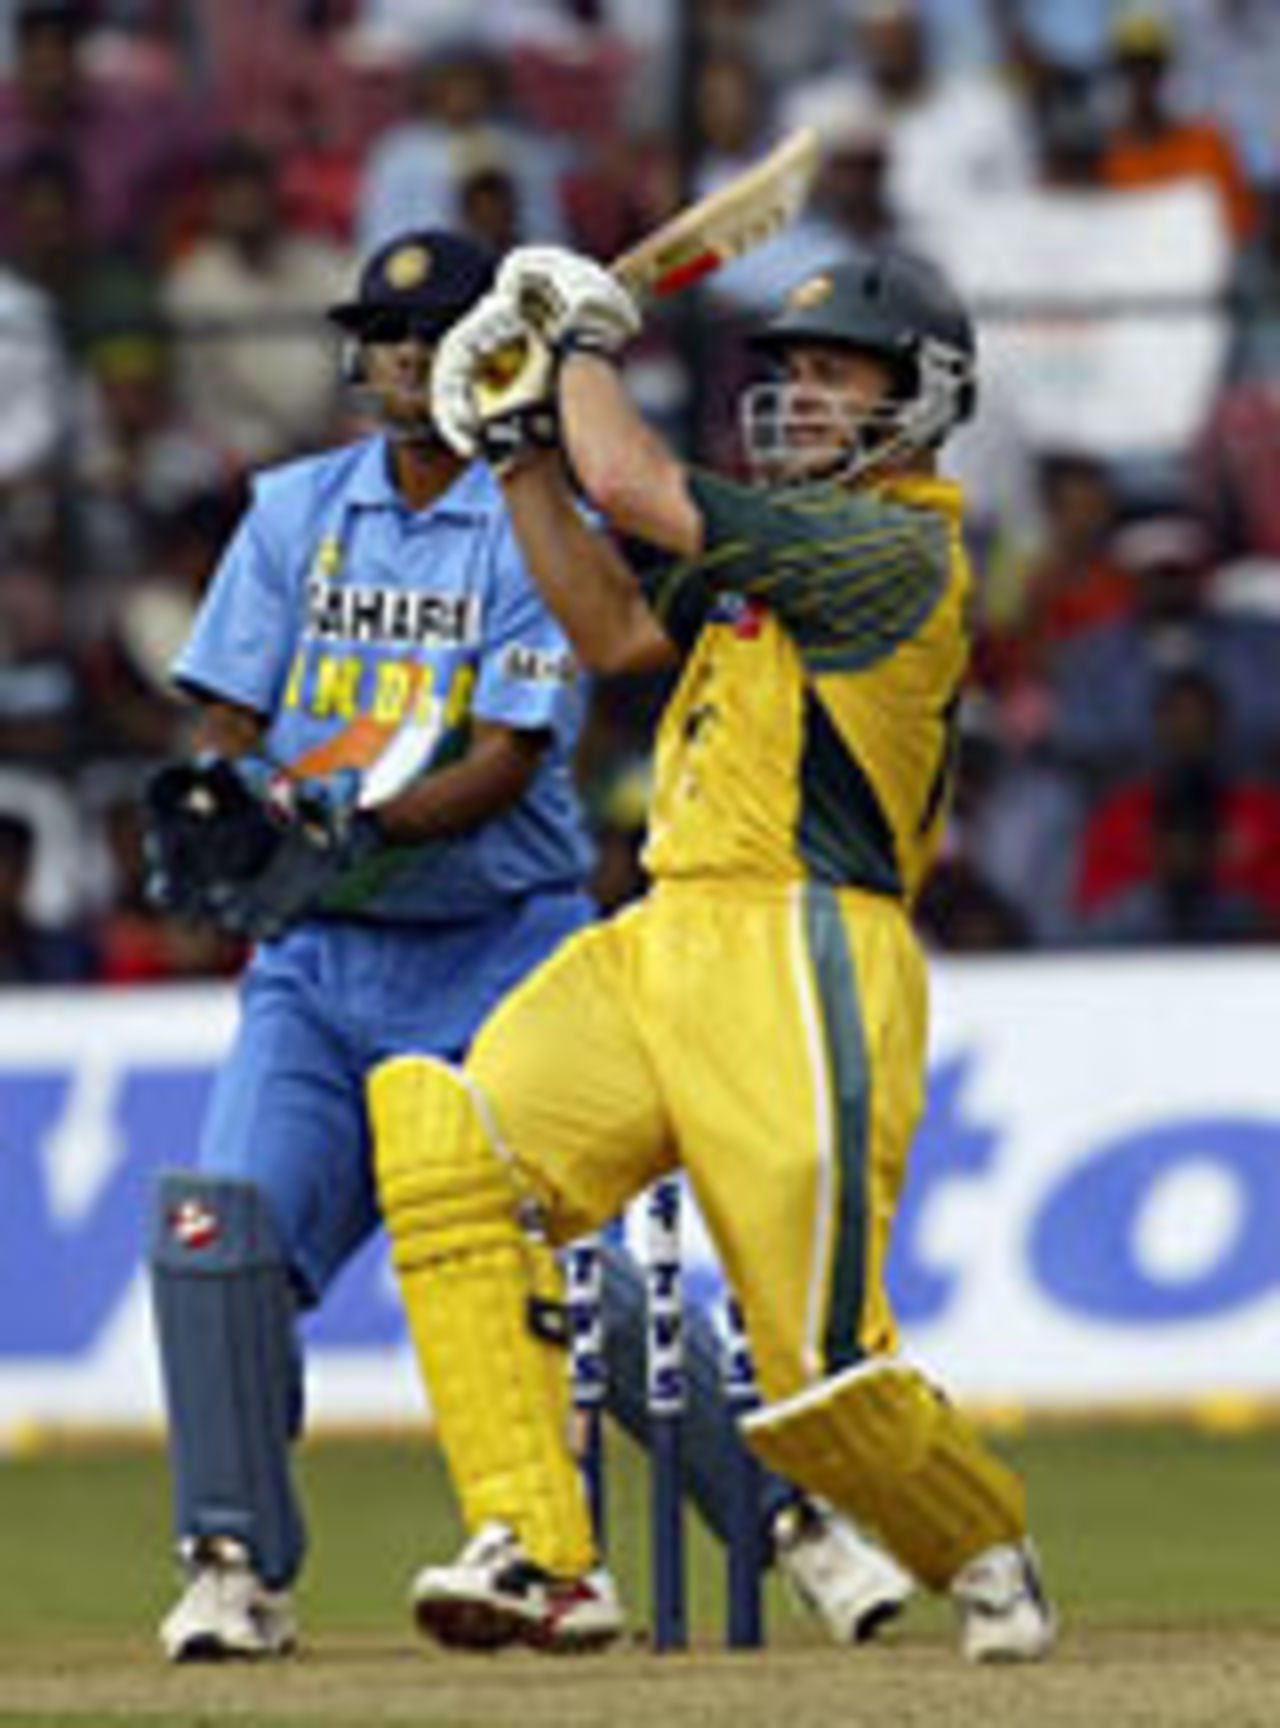 Adam Gilchrist on his way to a 94-ball hundred, India v Australia, TVS Cup, Banglaore, Noevmebr 12, 2003